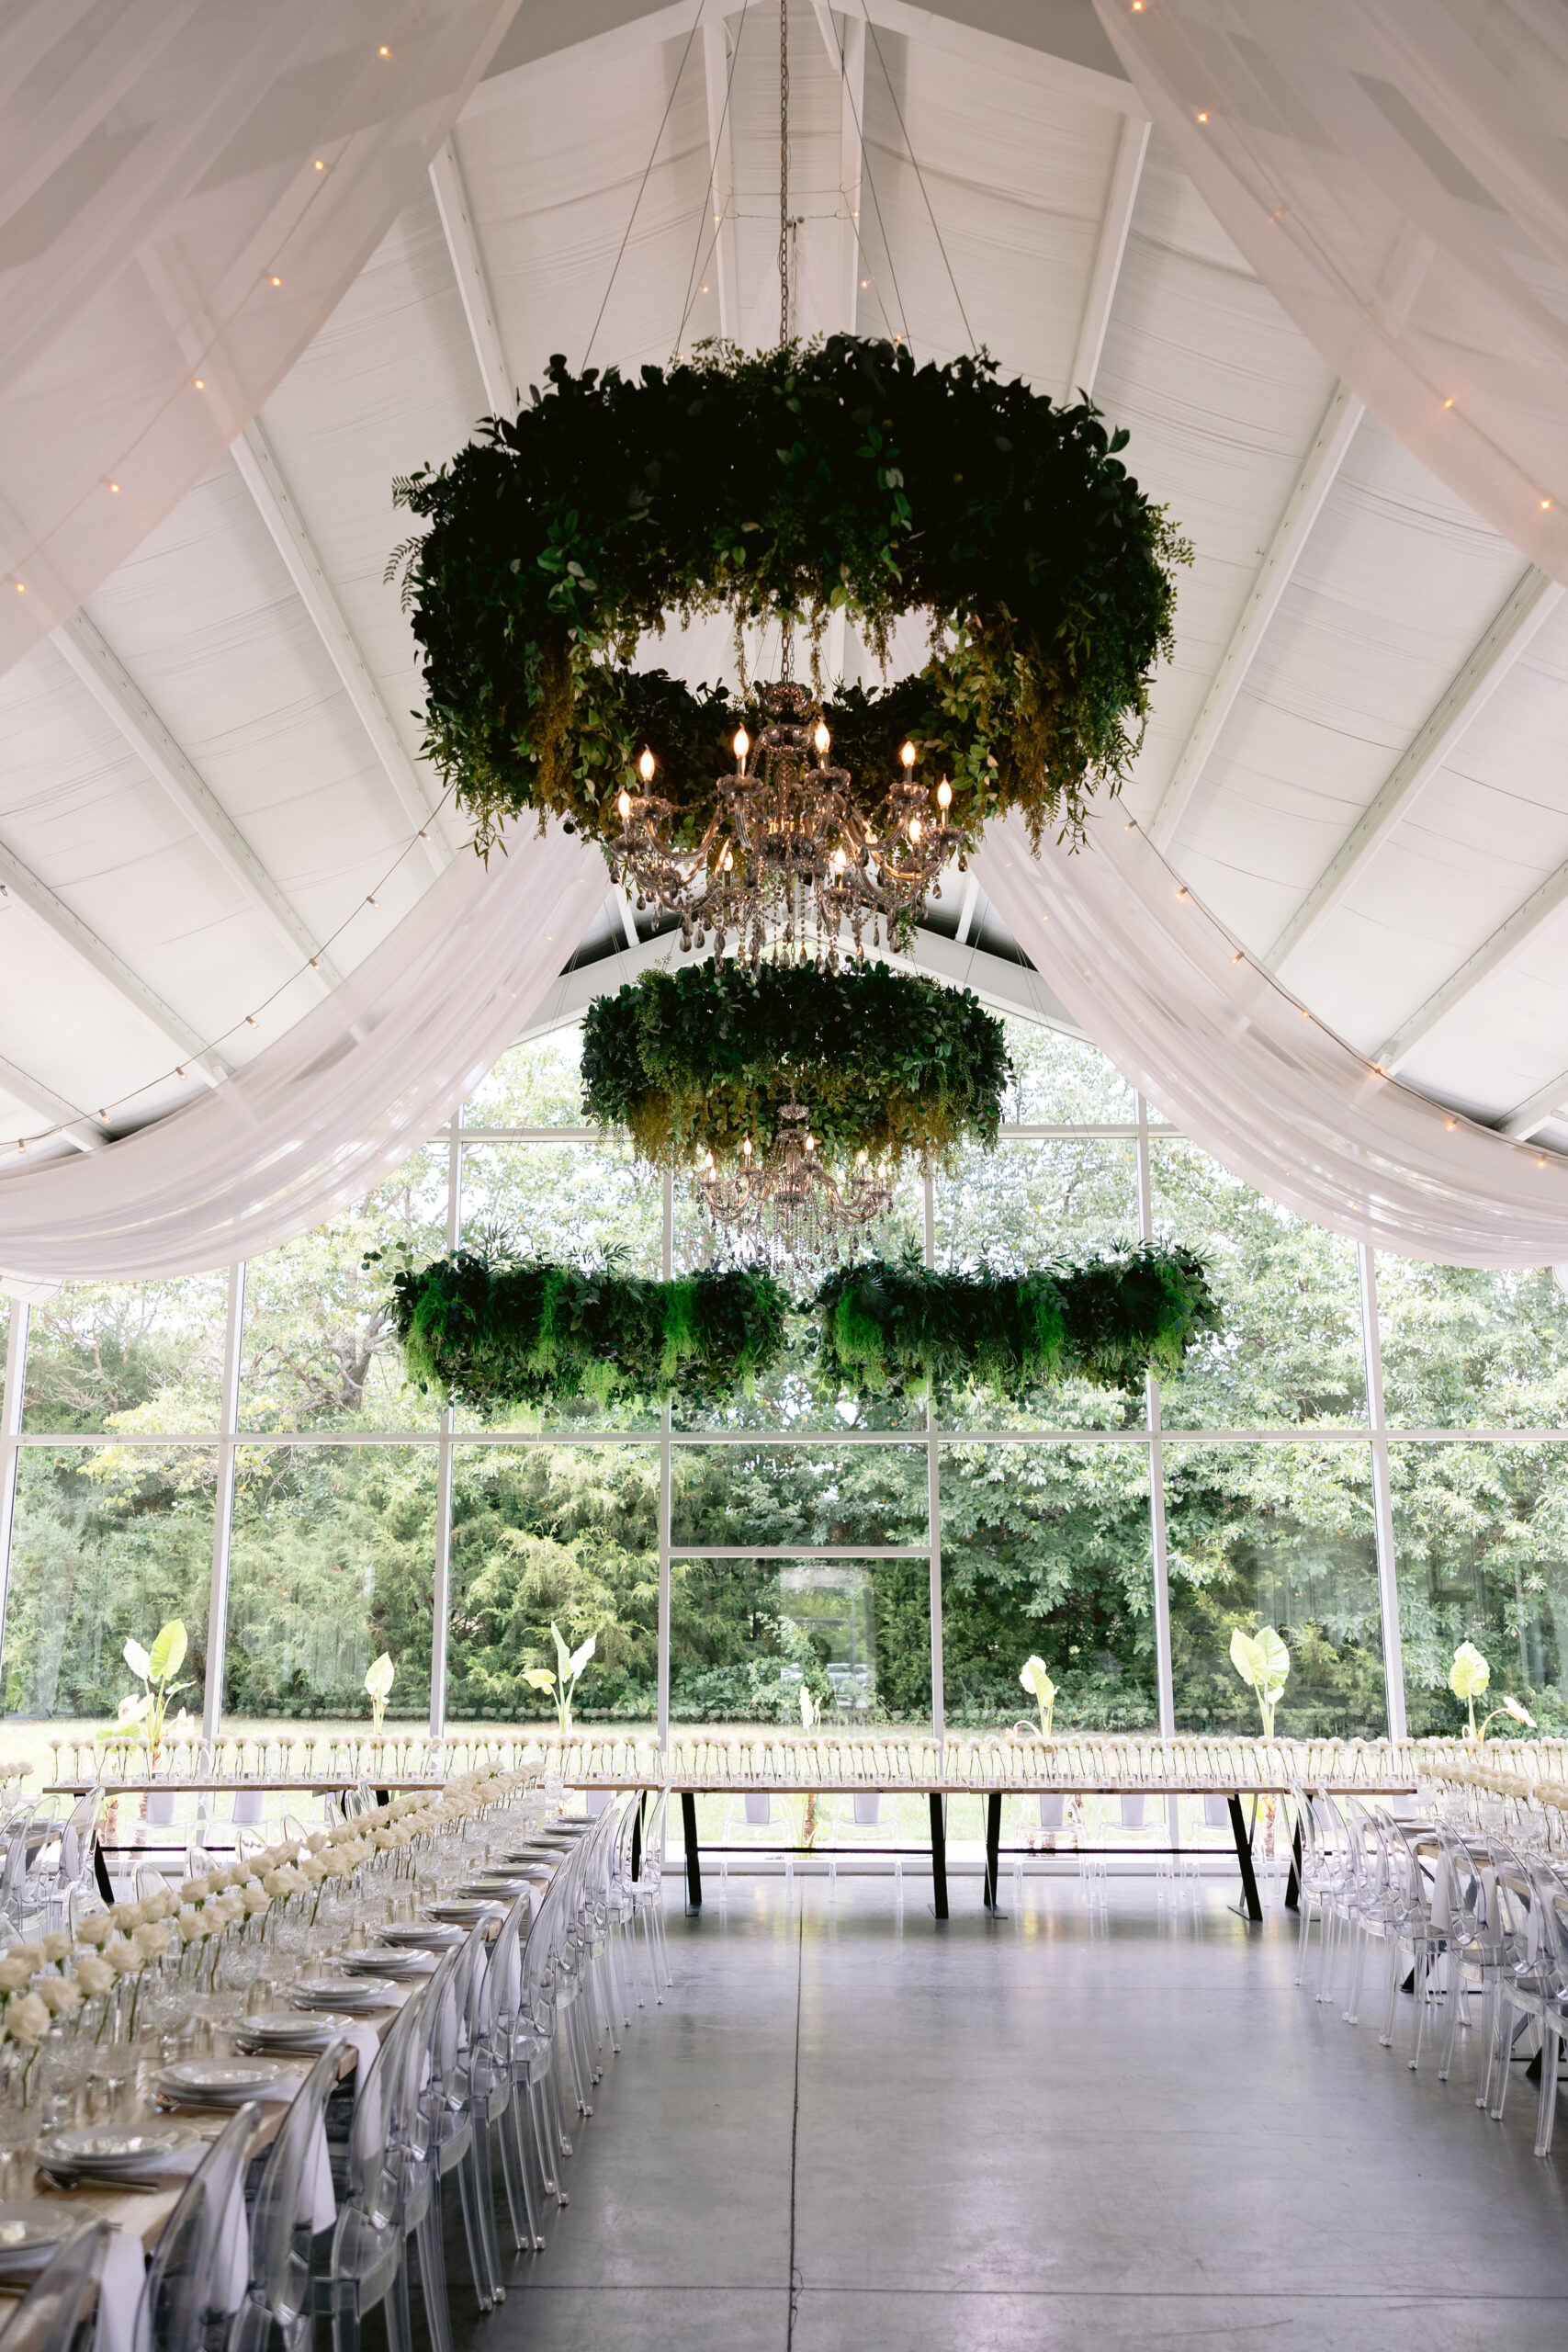 Greenhouse Two rivers wedding ceremony Reception dinner decor photographed by Tatyana Zadorin Photography